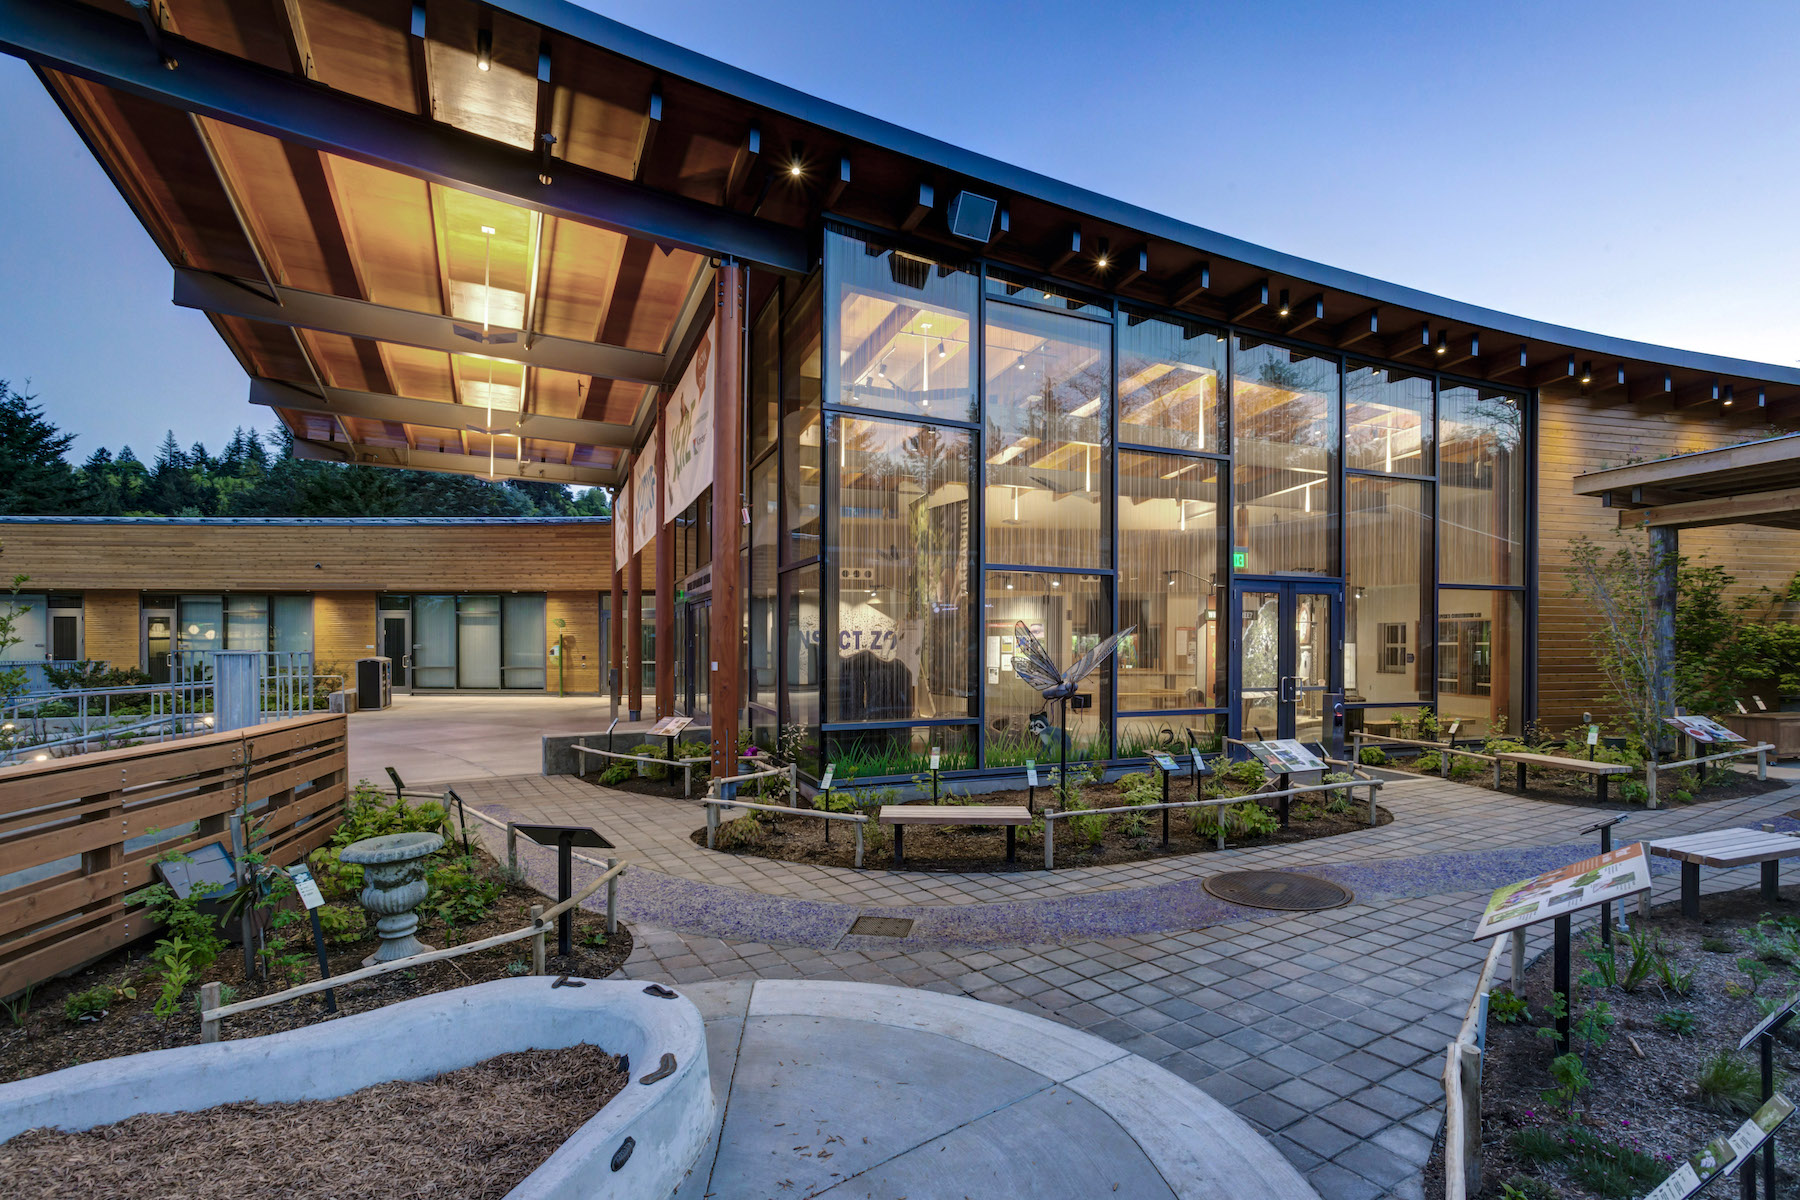 A new addition at The National Aviary in Pittsburgh showcases acid-etched, solar control low-e glass to provide views, bird safety and energy performance. Photo courtesy of Vitro Architectural Glass